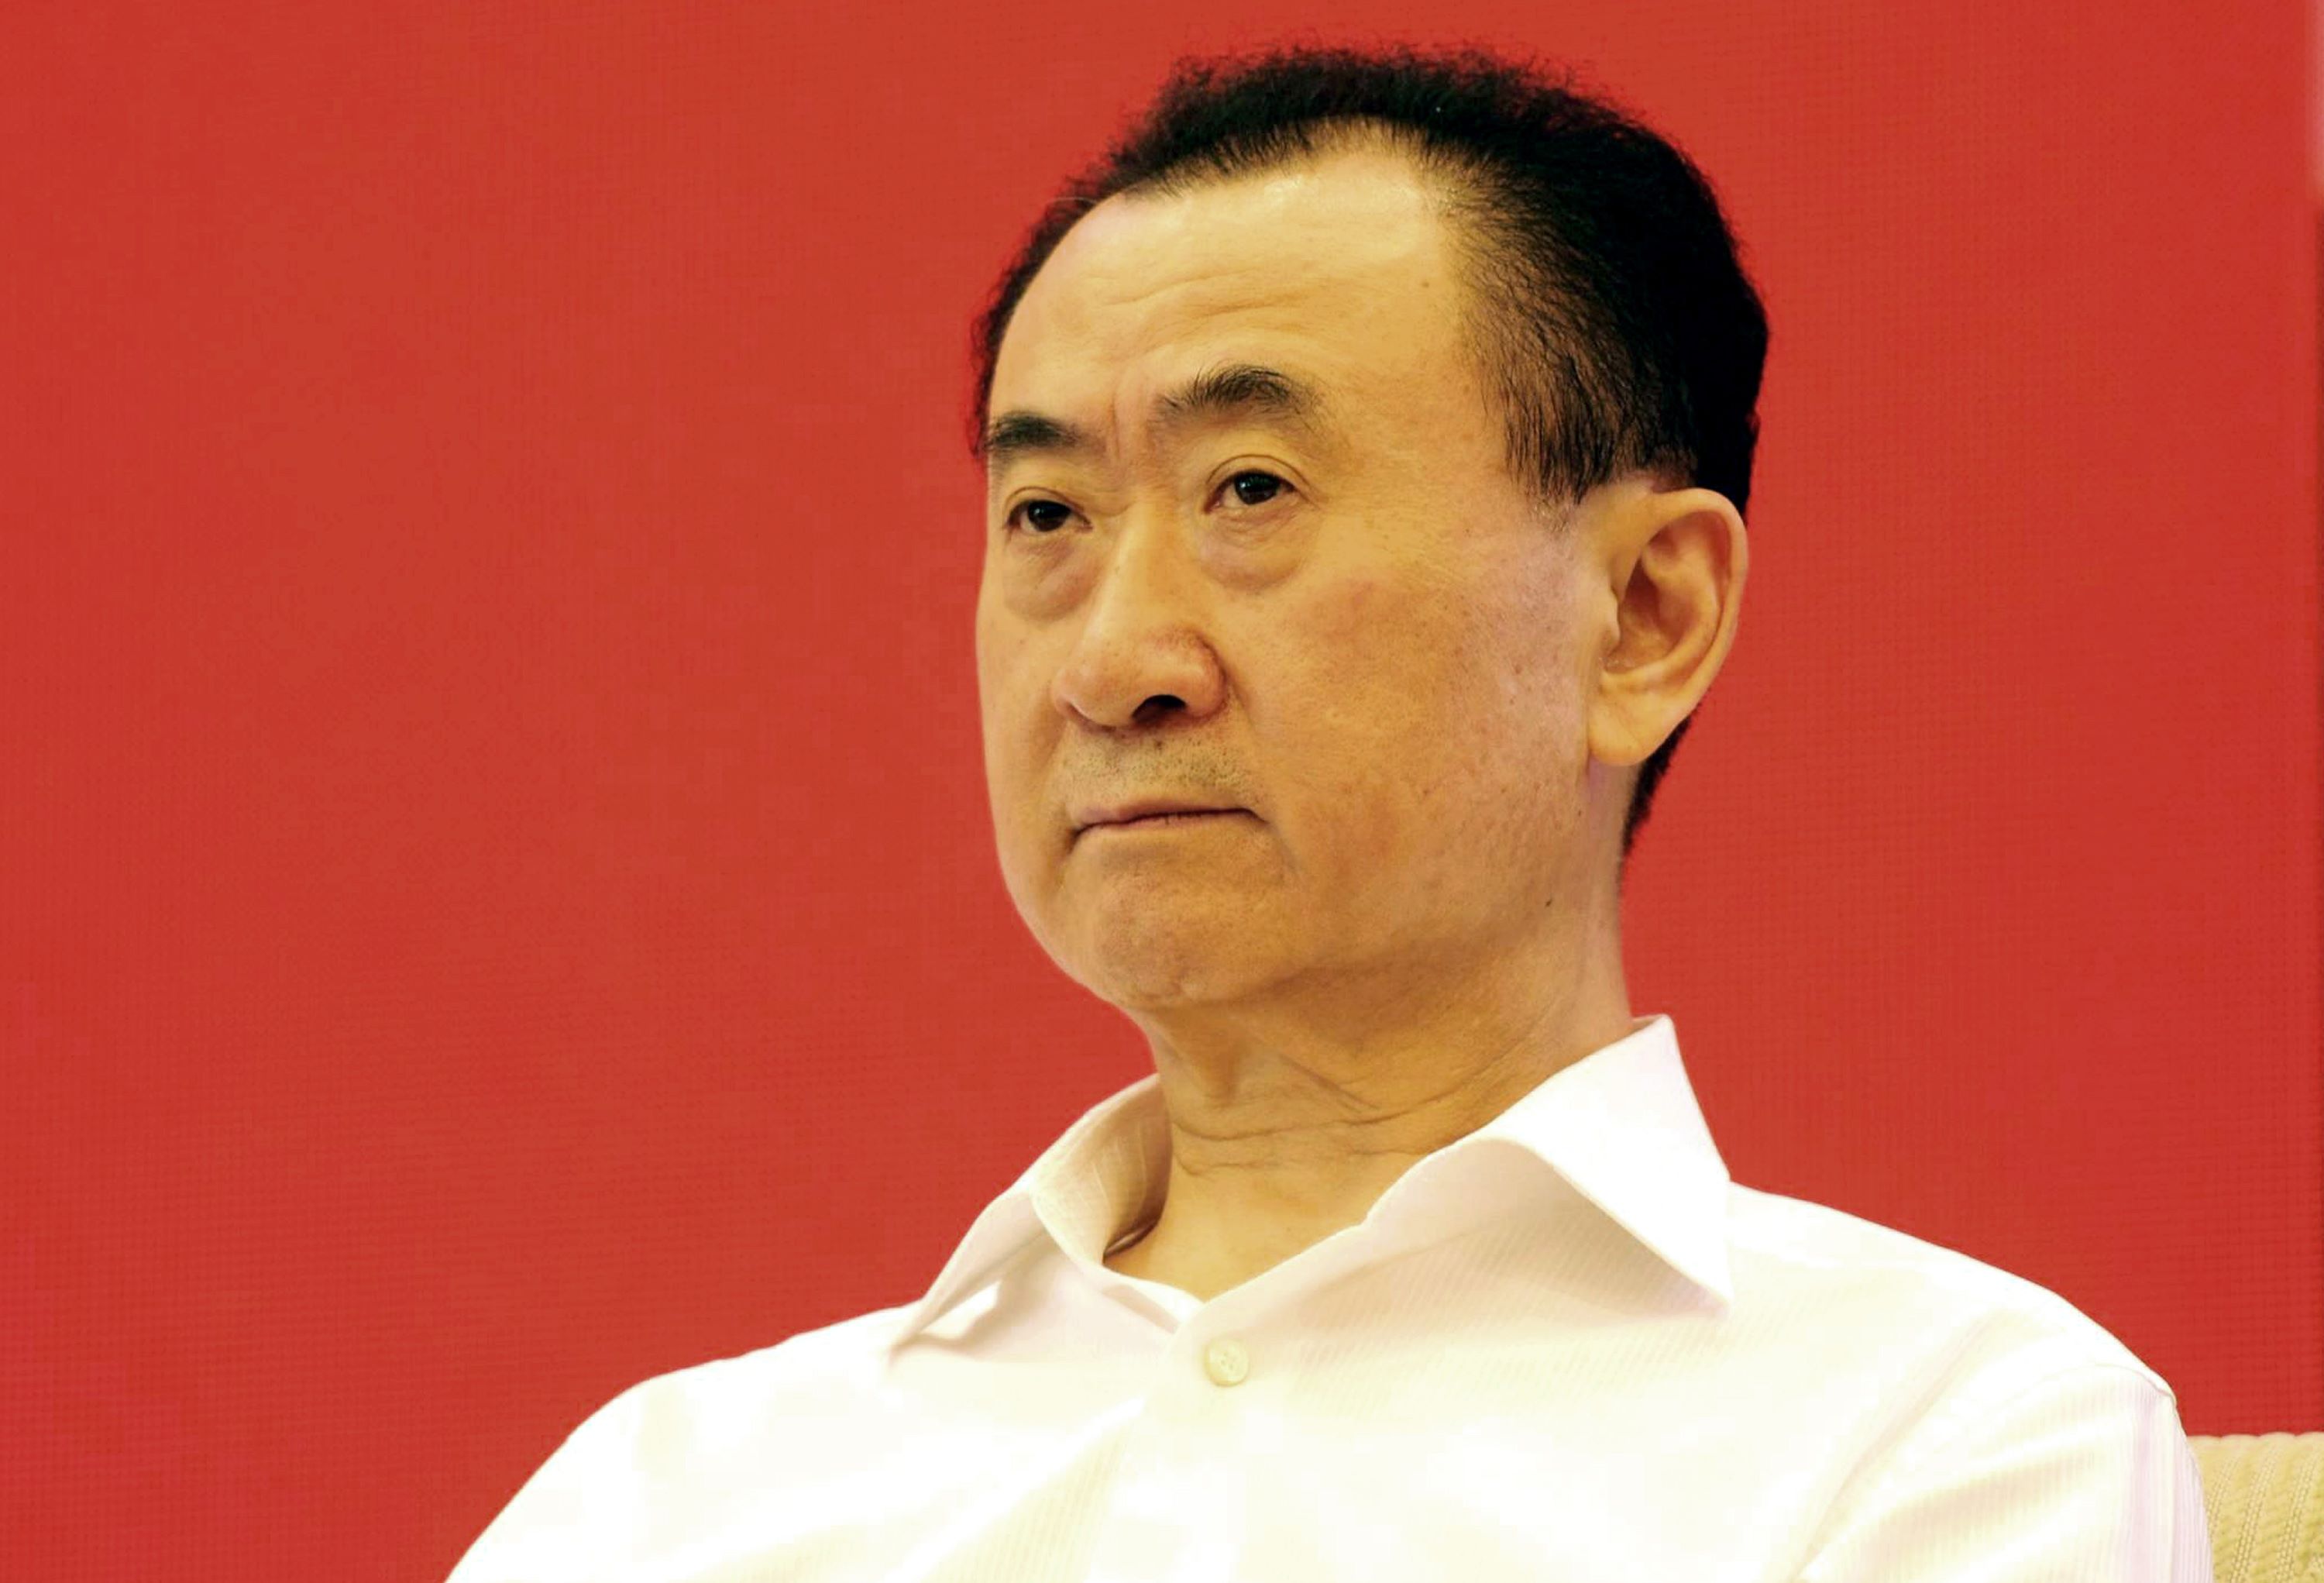 Wang Jianlin's estimated fortune has doubled over the past year, partly due to the listing of two of his businesses on stock markets in China, according to the magazine. Photo: AFP